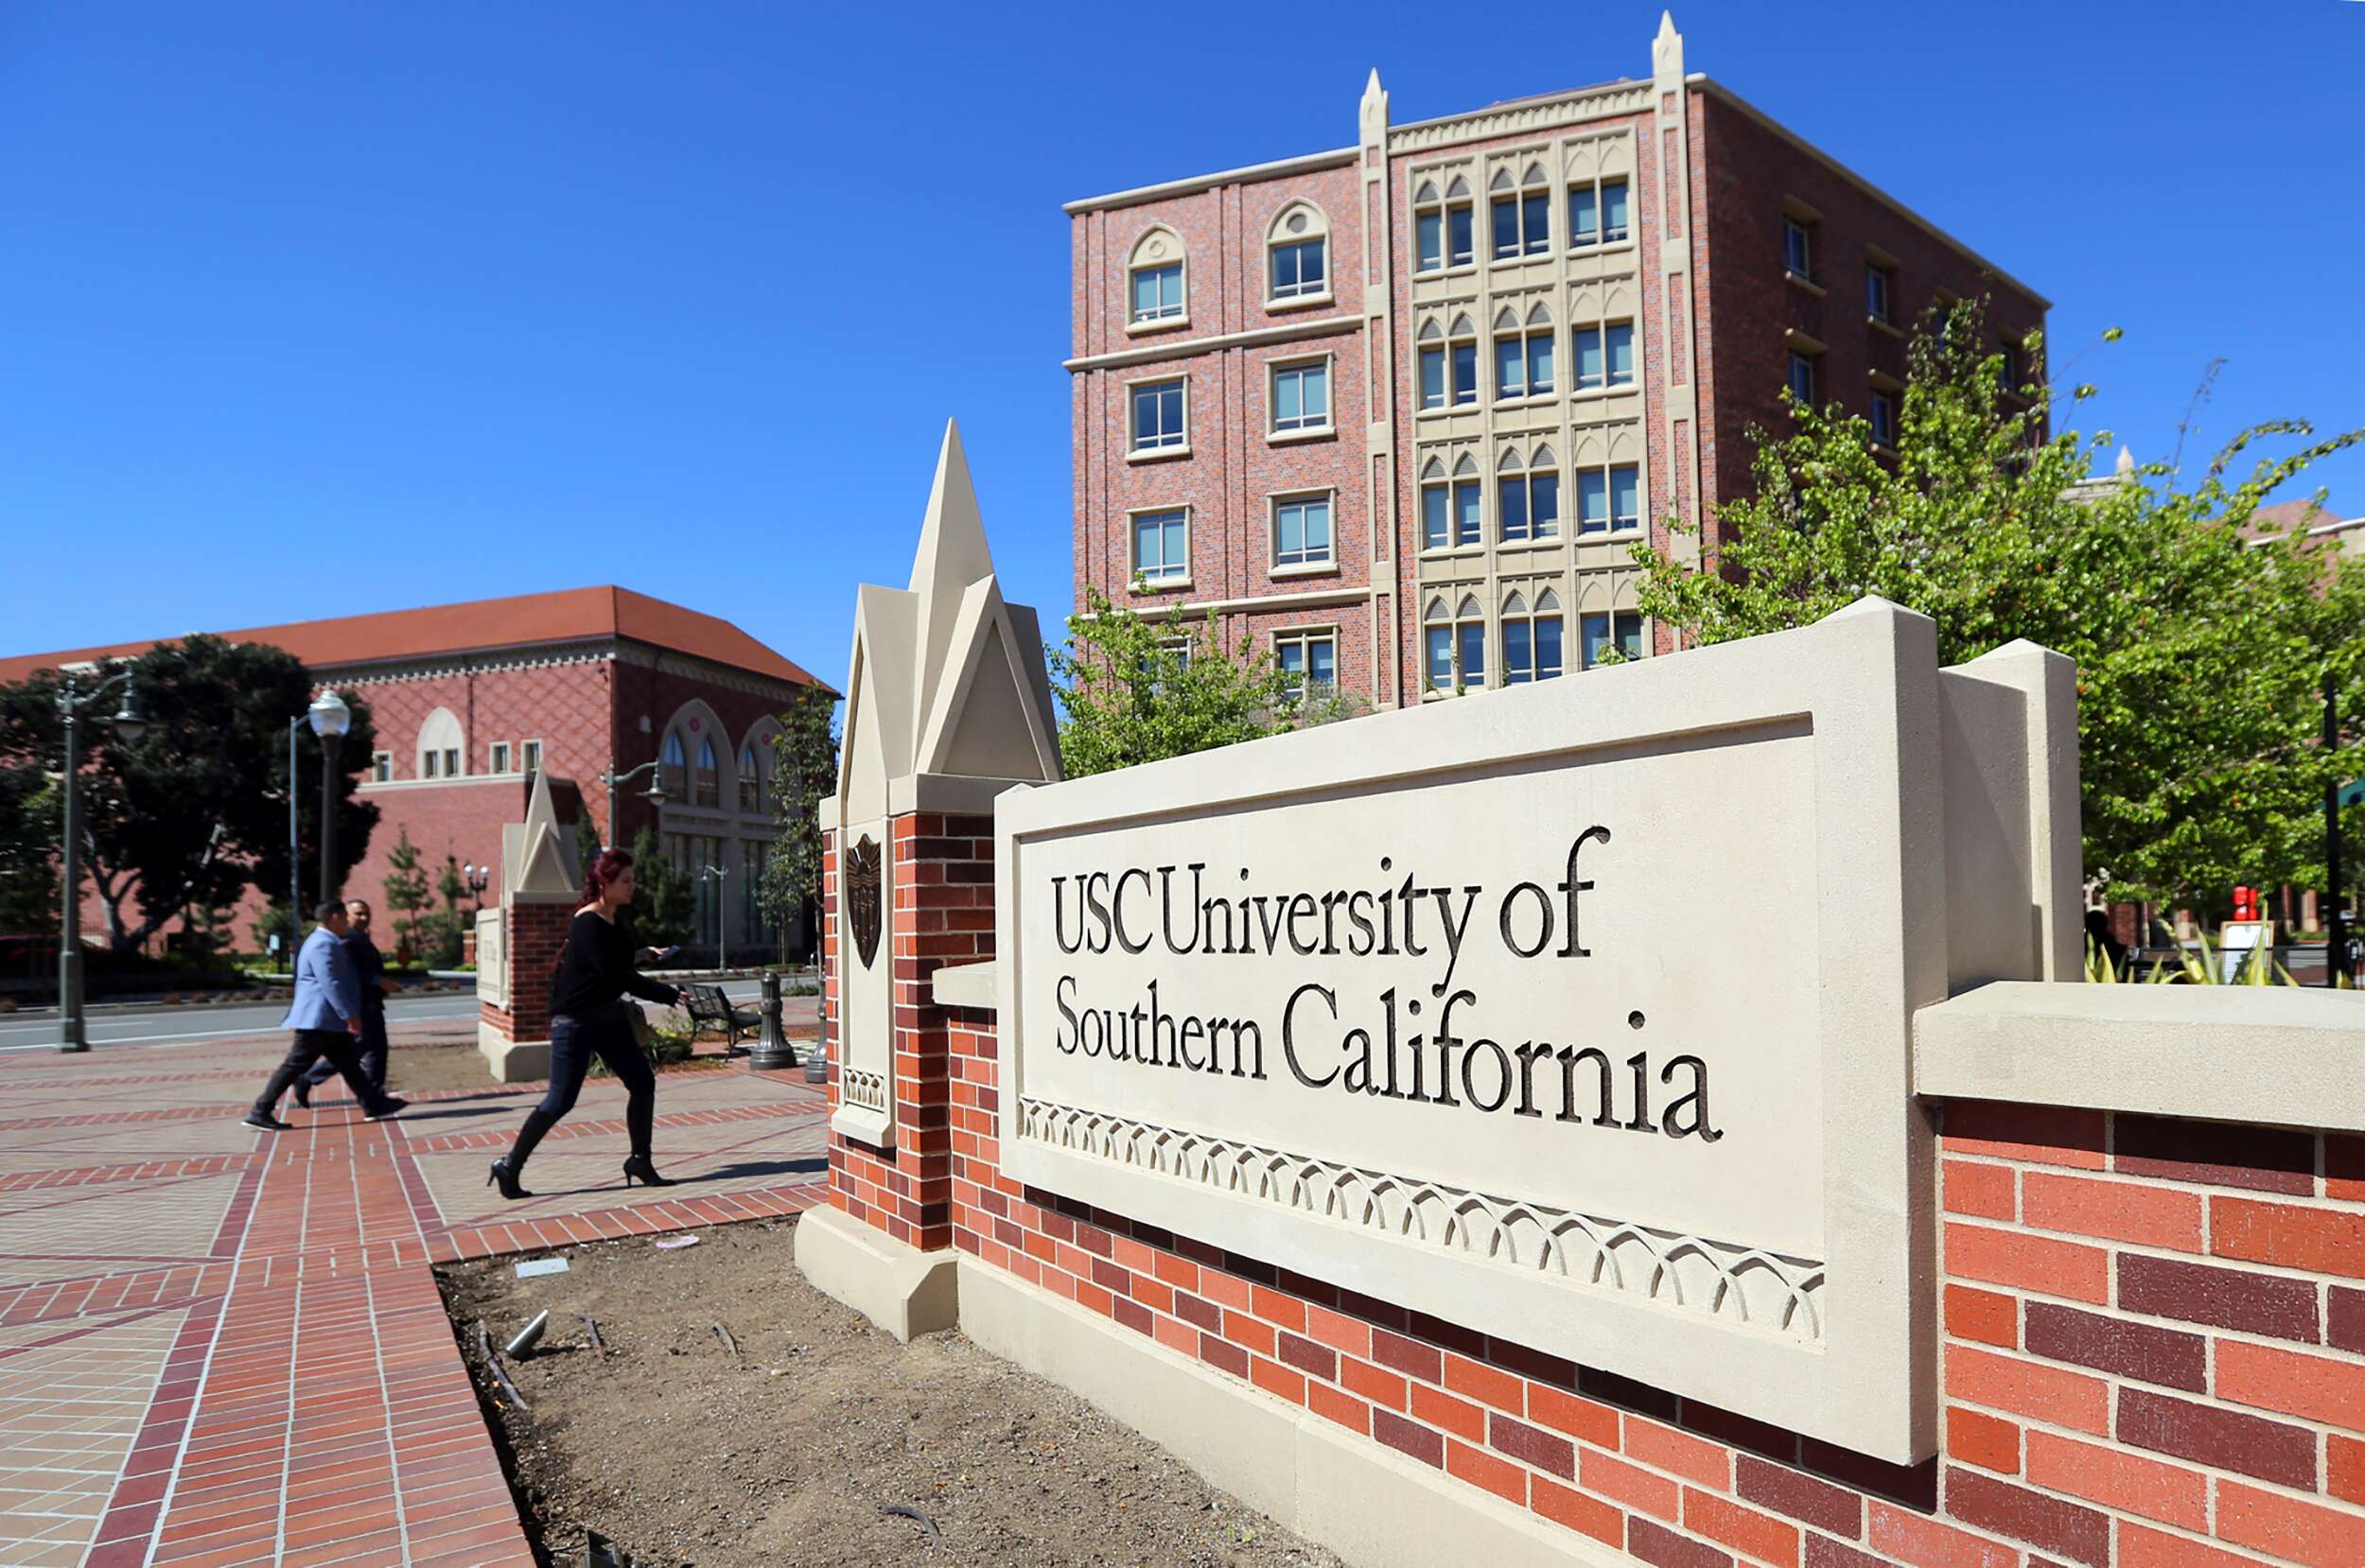 USC Transfer Acceptance Rate and Admission Requirements